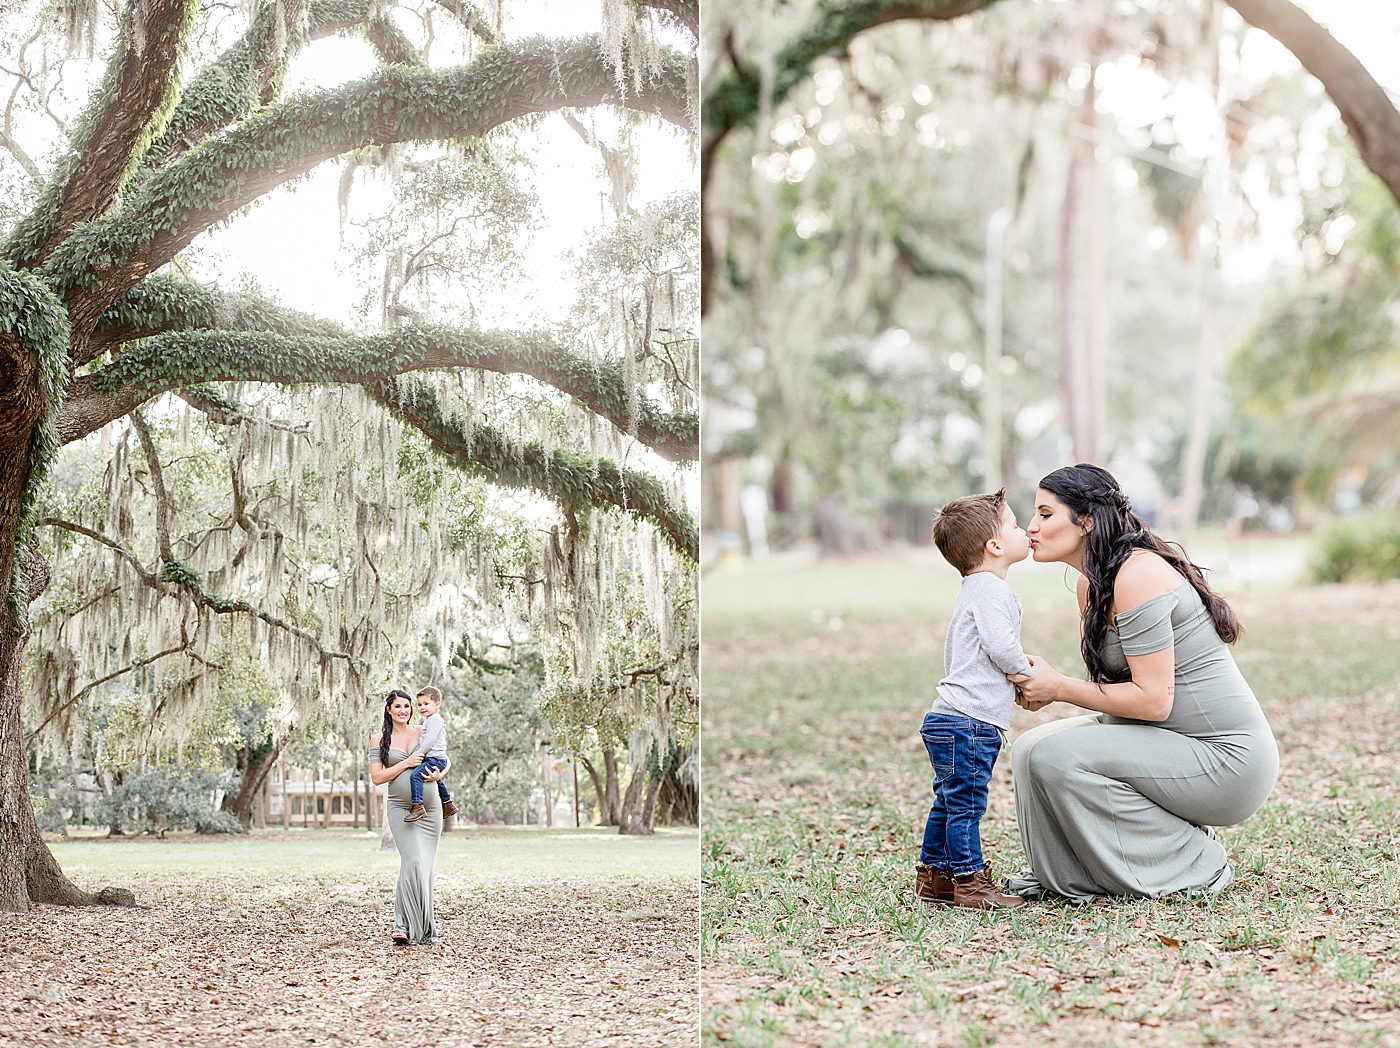 Sweet moments between a Mom and her first son during maternity session. Photos by Brittany Elise Photography.